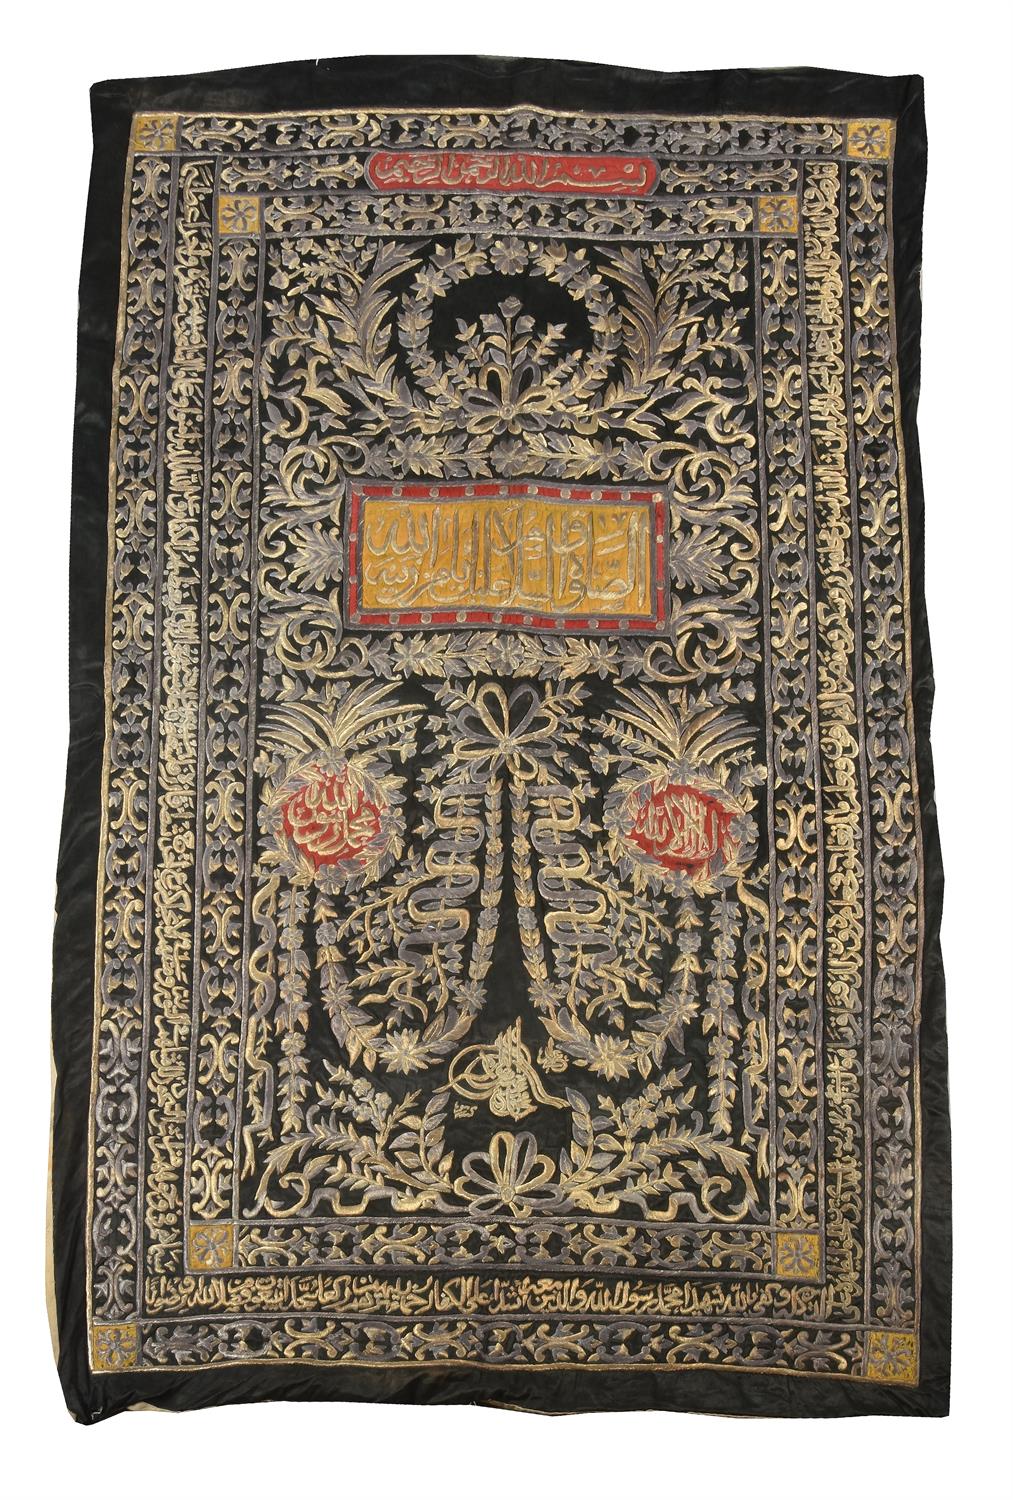 An Ottoman metal thread embroidered silk Curtain with the tughra of Mahmud II